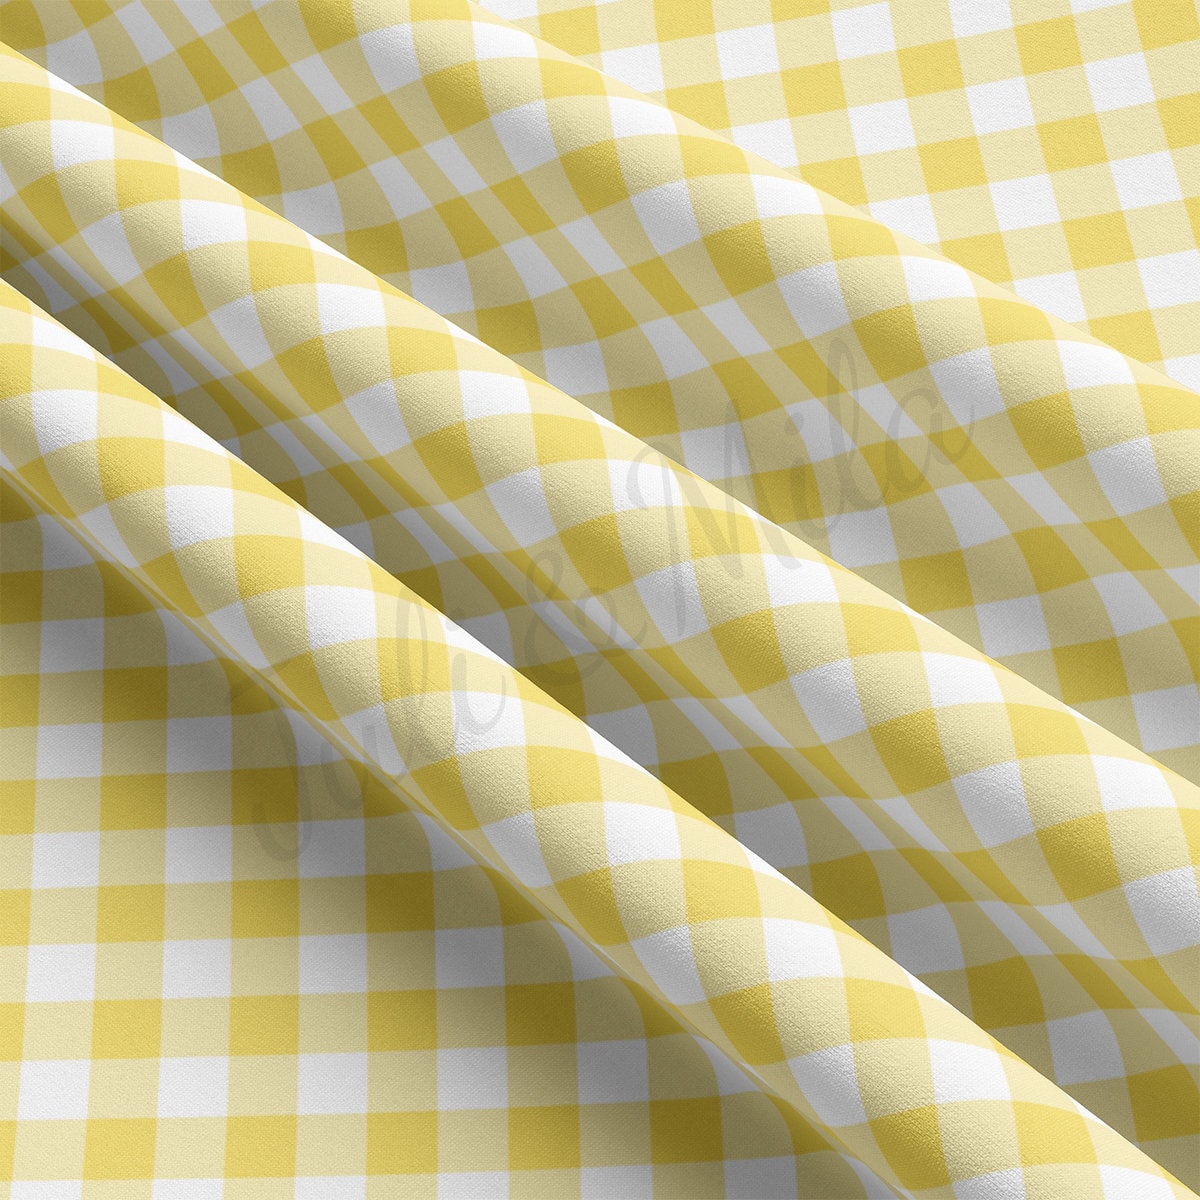 DBP Fabric Double Brushed Polyester DBP2391 Gingham